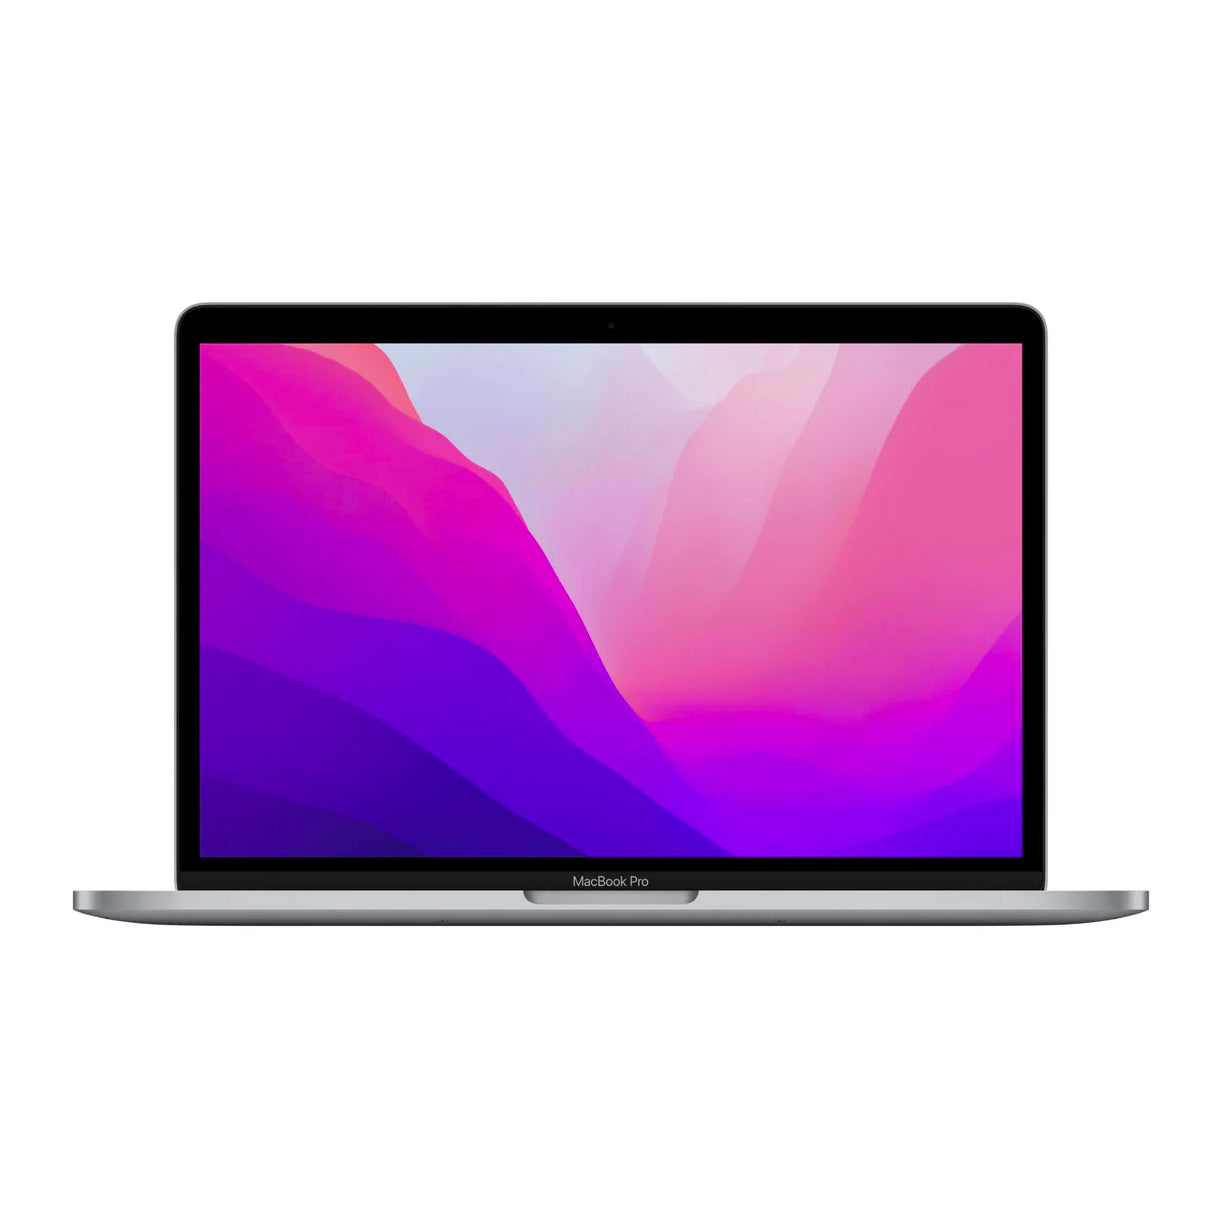 NEW Apple Macbook Pro with M1 Chip 13 Inch Laptop 2020 Model ( 16GB, 256GB  SSD)